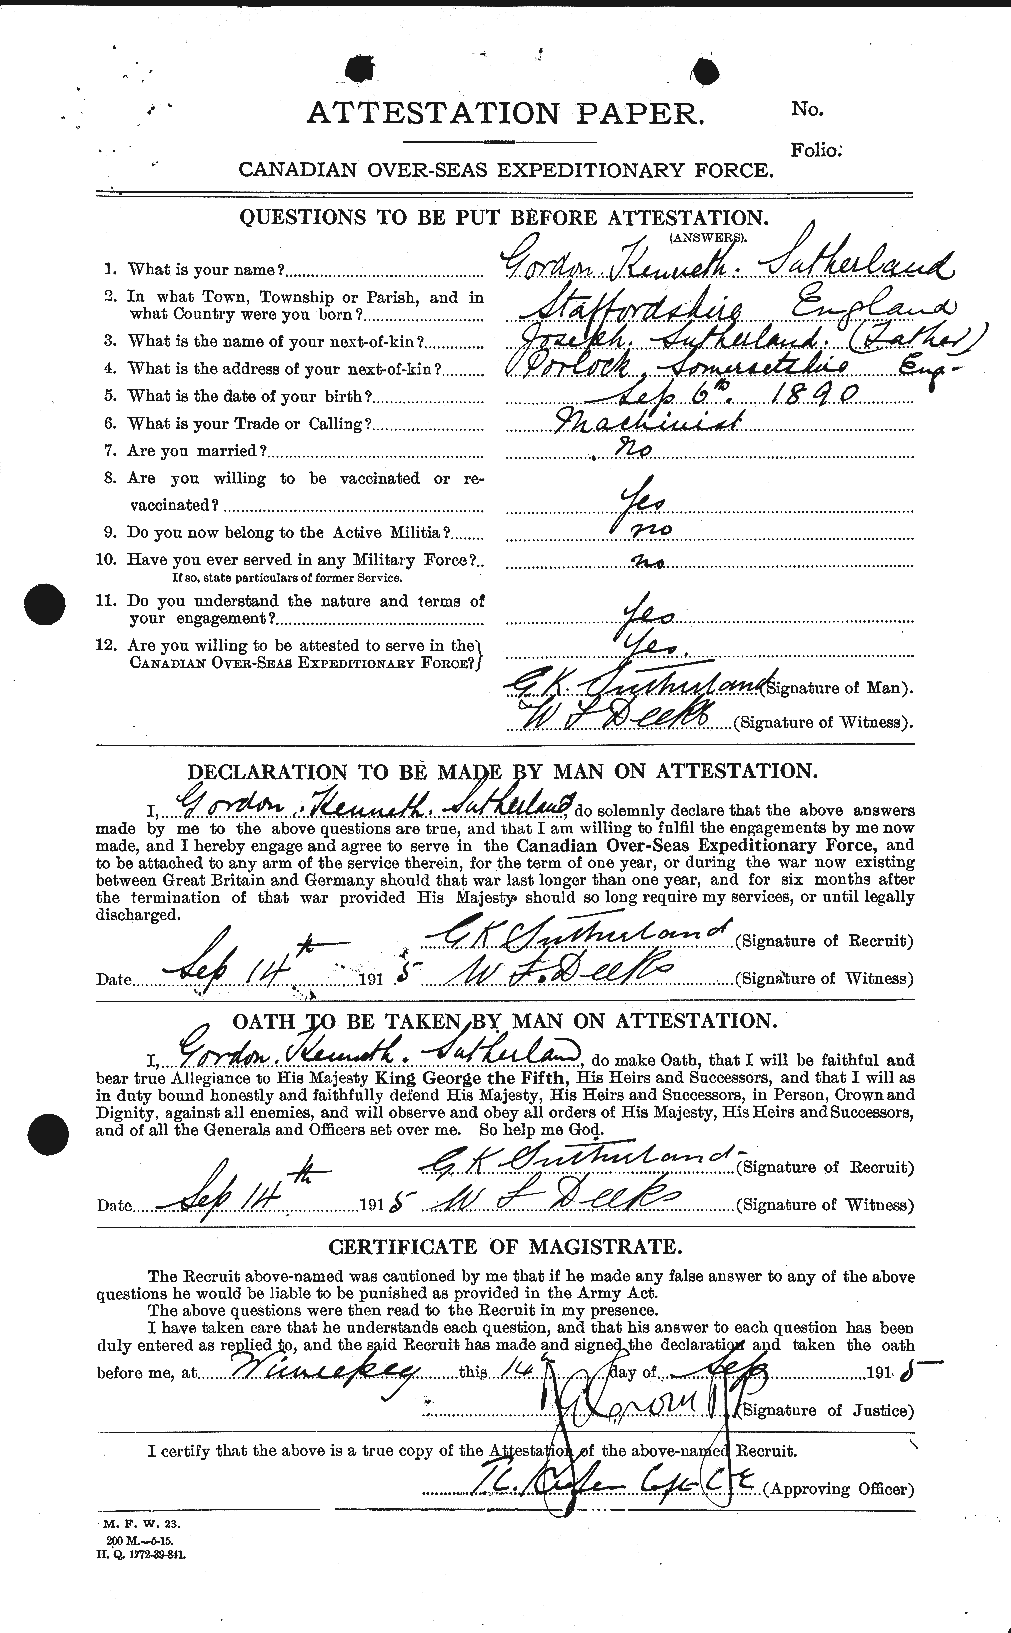 Personnel Records of the First World War - CEF 124826a